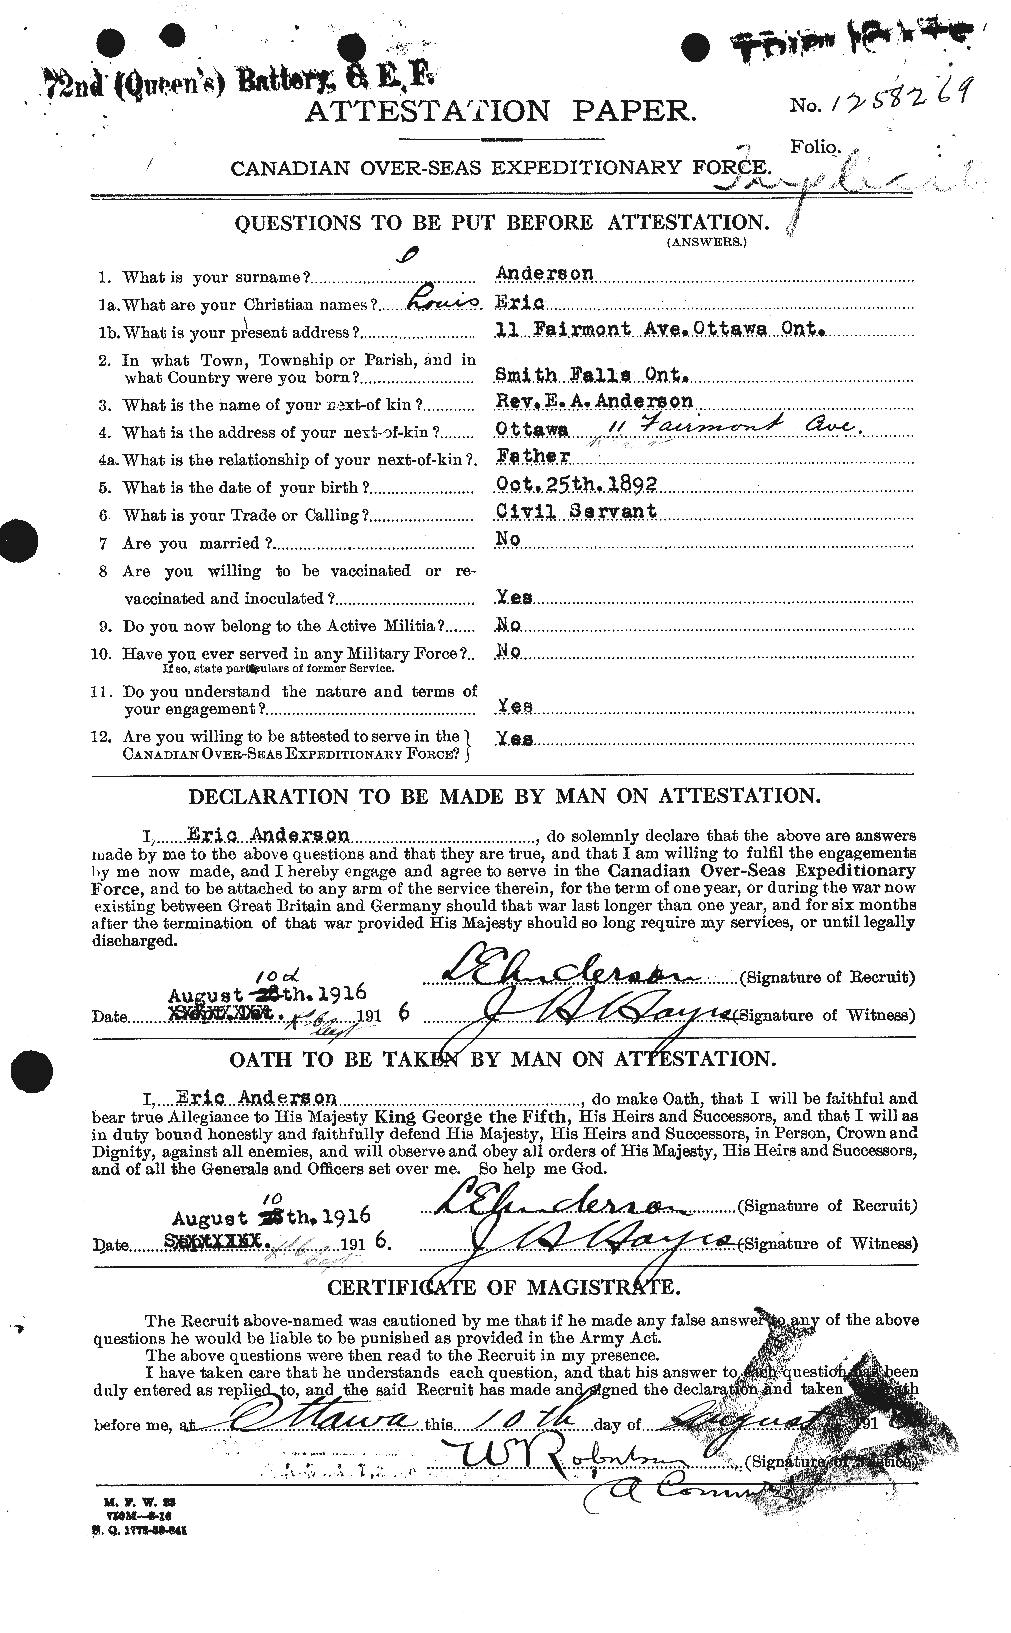 Personnel Records of the First World War - CEF 209898a